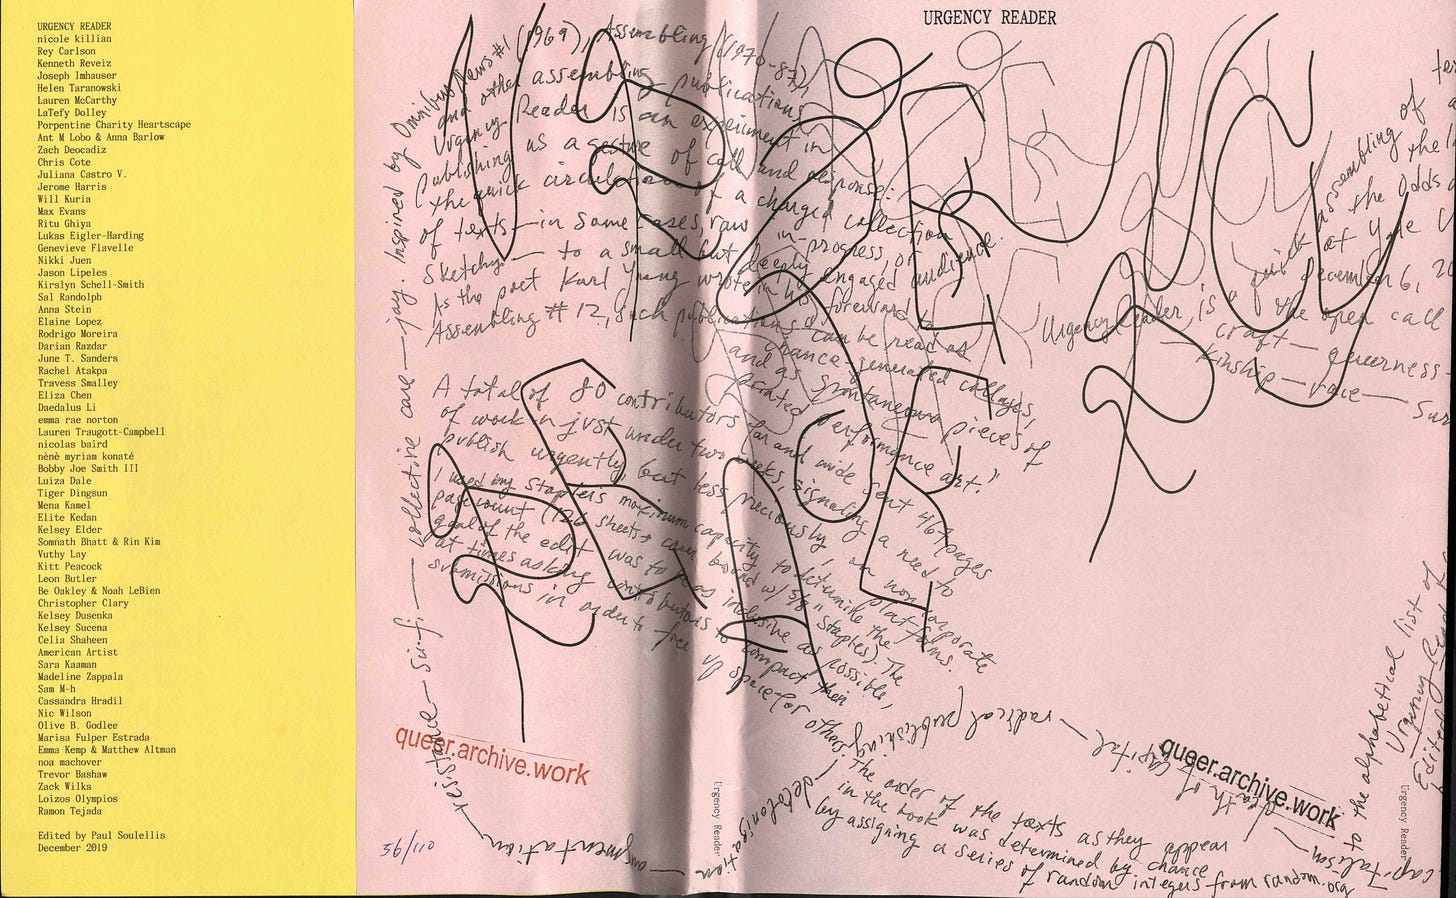 The open cover of Urgency Reader, 2019. There is a band of yellow on the left with a list of all the contributors. To the right is a large scribbly drawing with handwritten letters and notes on a pale pink background. QUEER.ARCHIVE.WORK is hand stamped in two places, once in red ink, once in black.